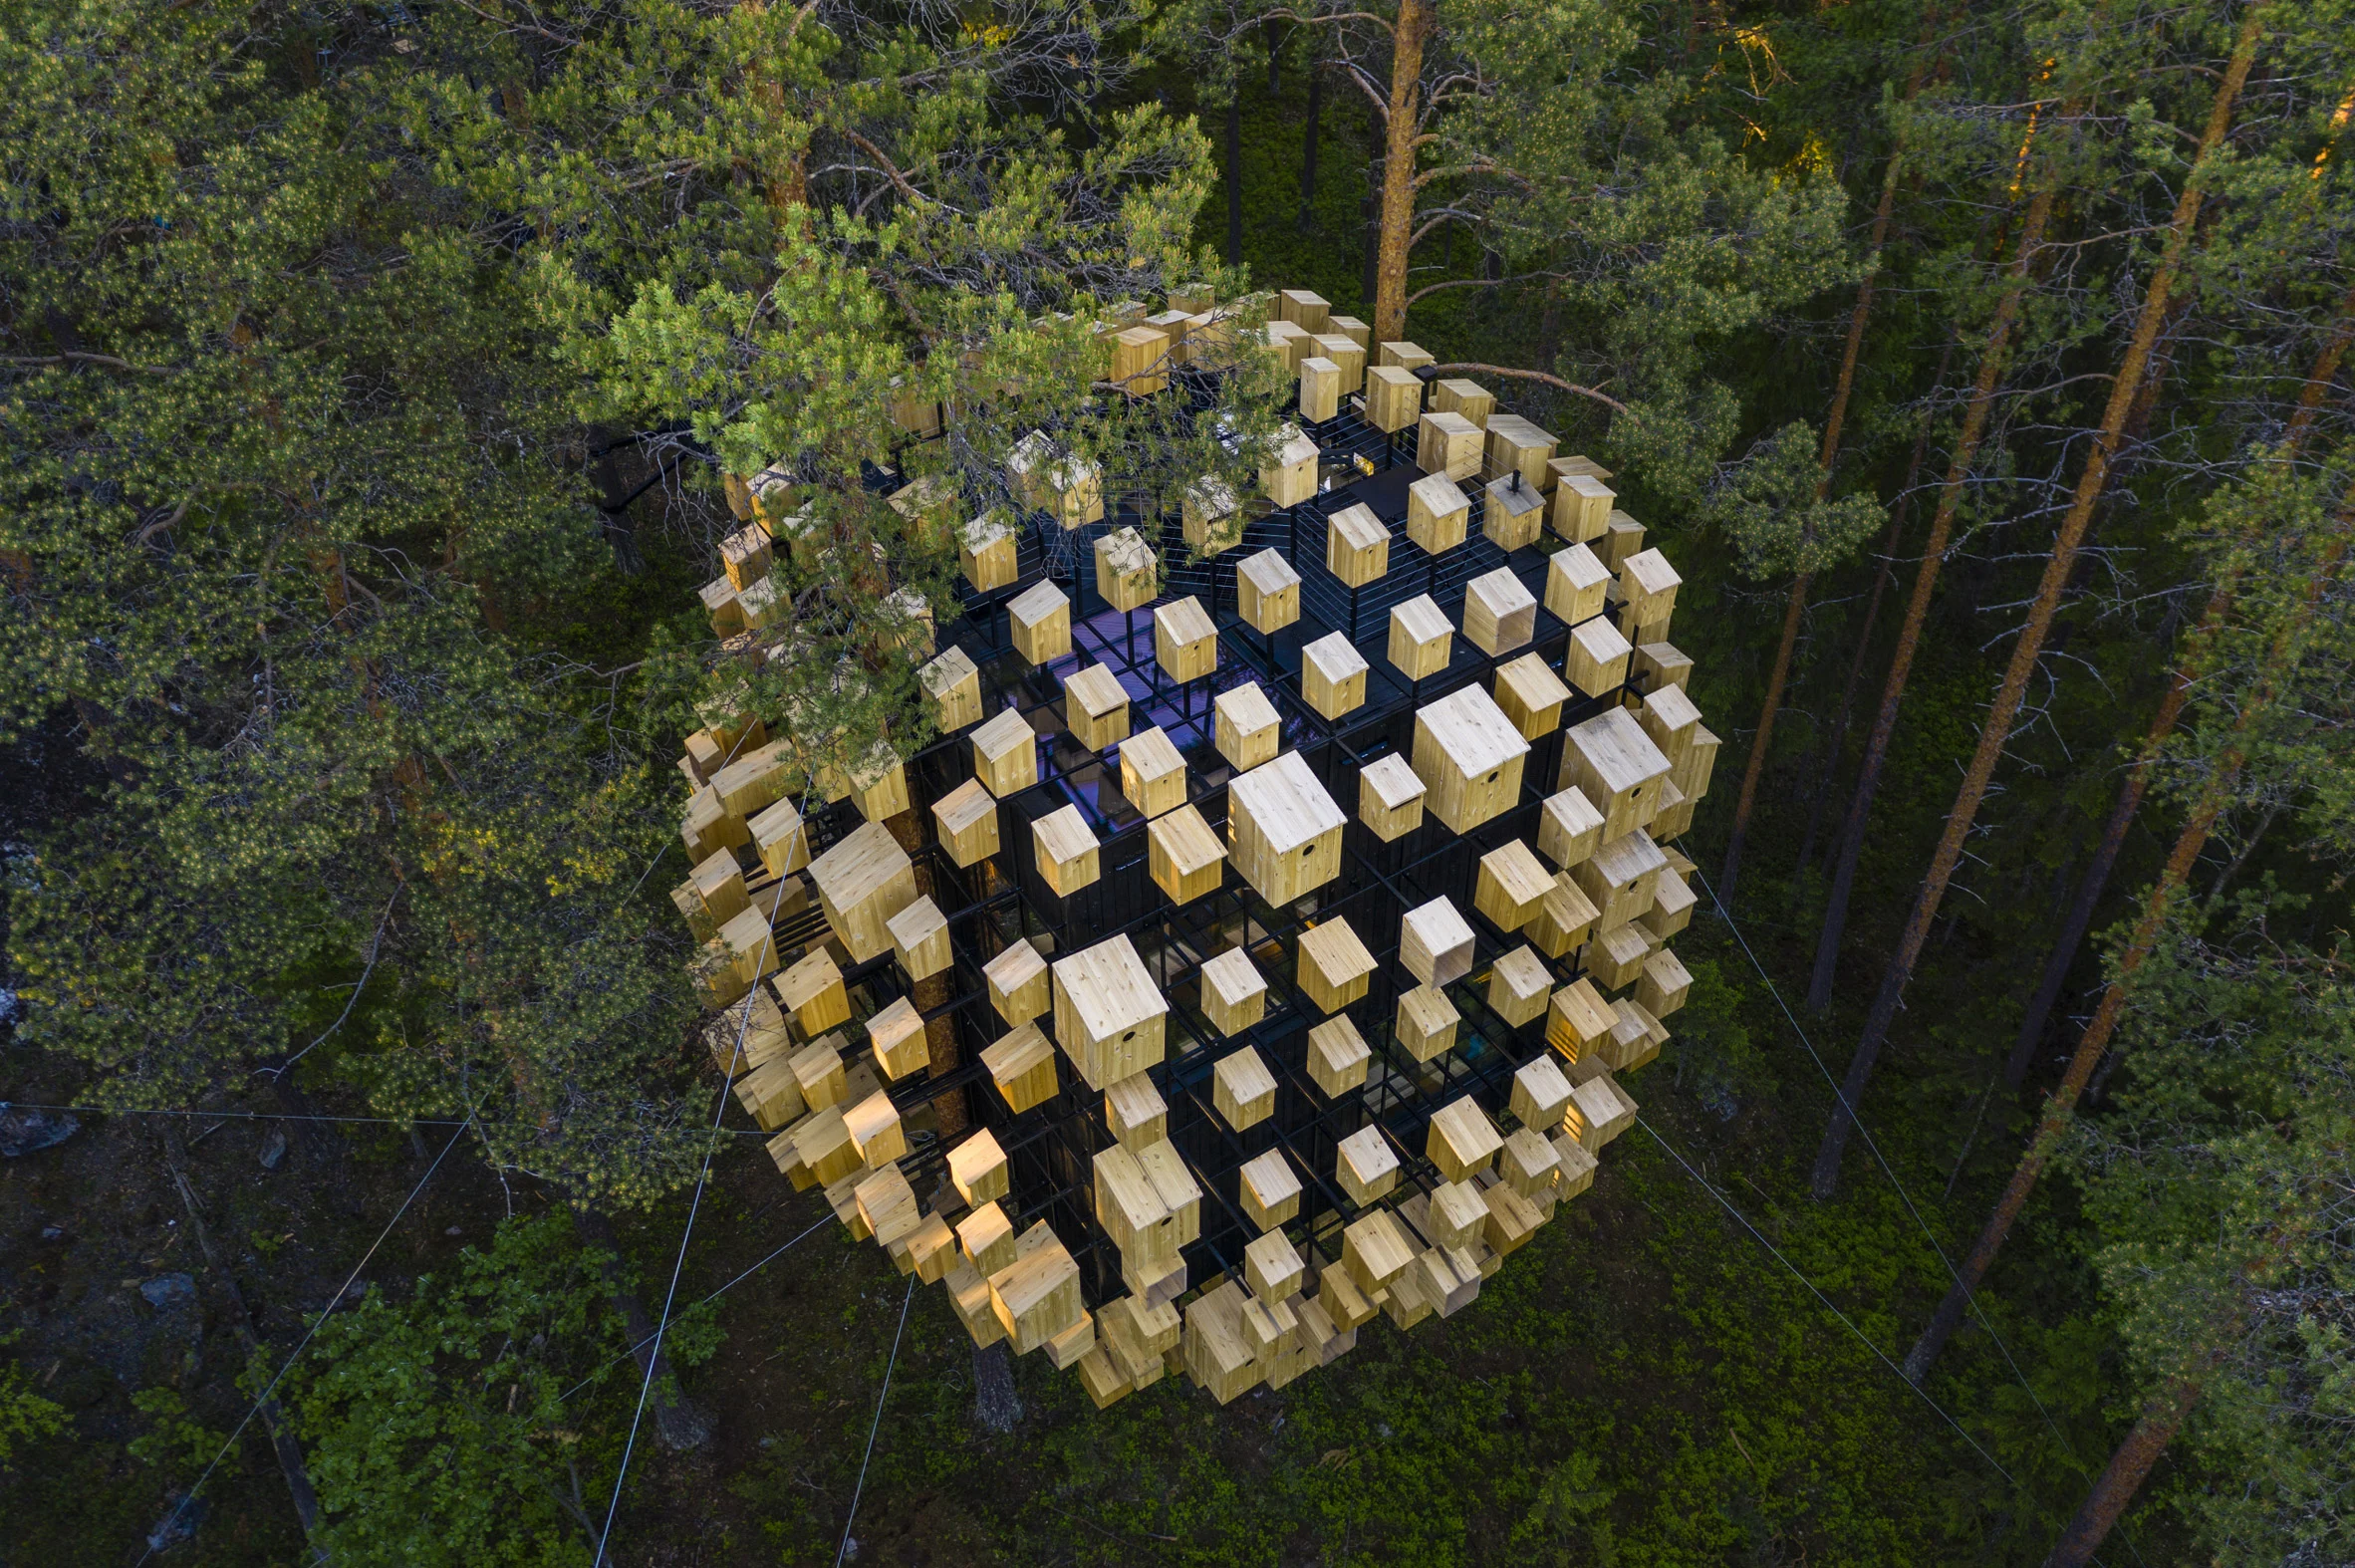 350 Bird Houses Cover This Suspended Hotel Room in a Swedish Forest